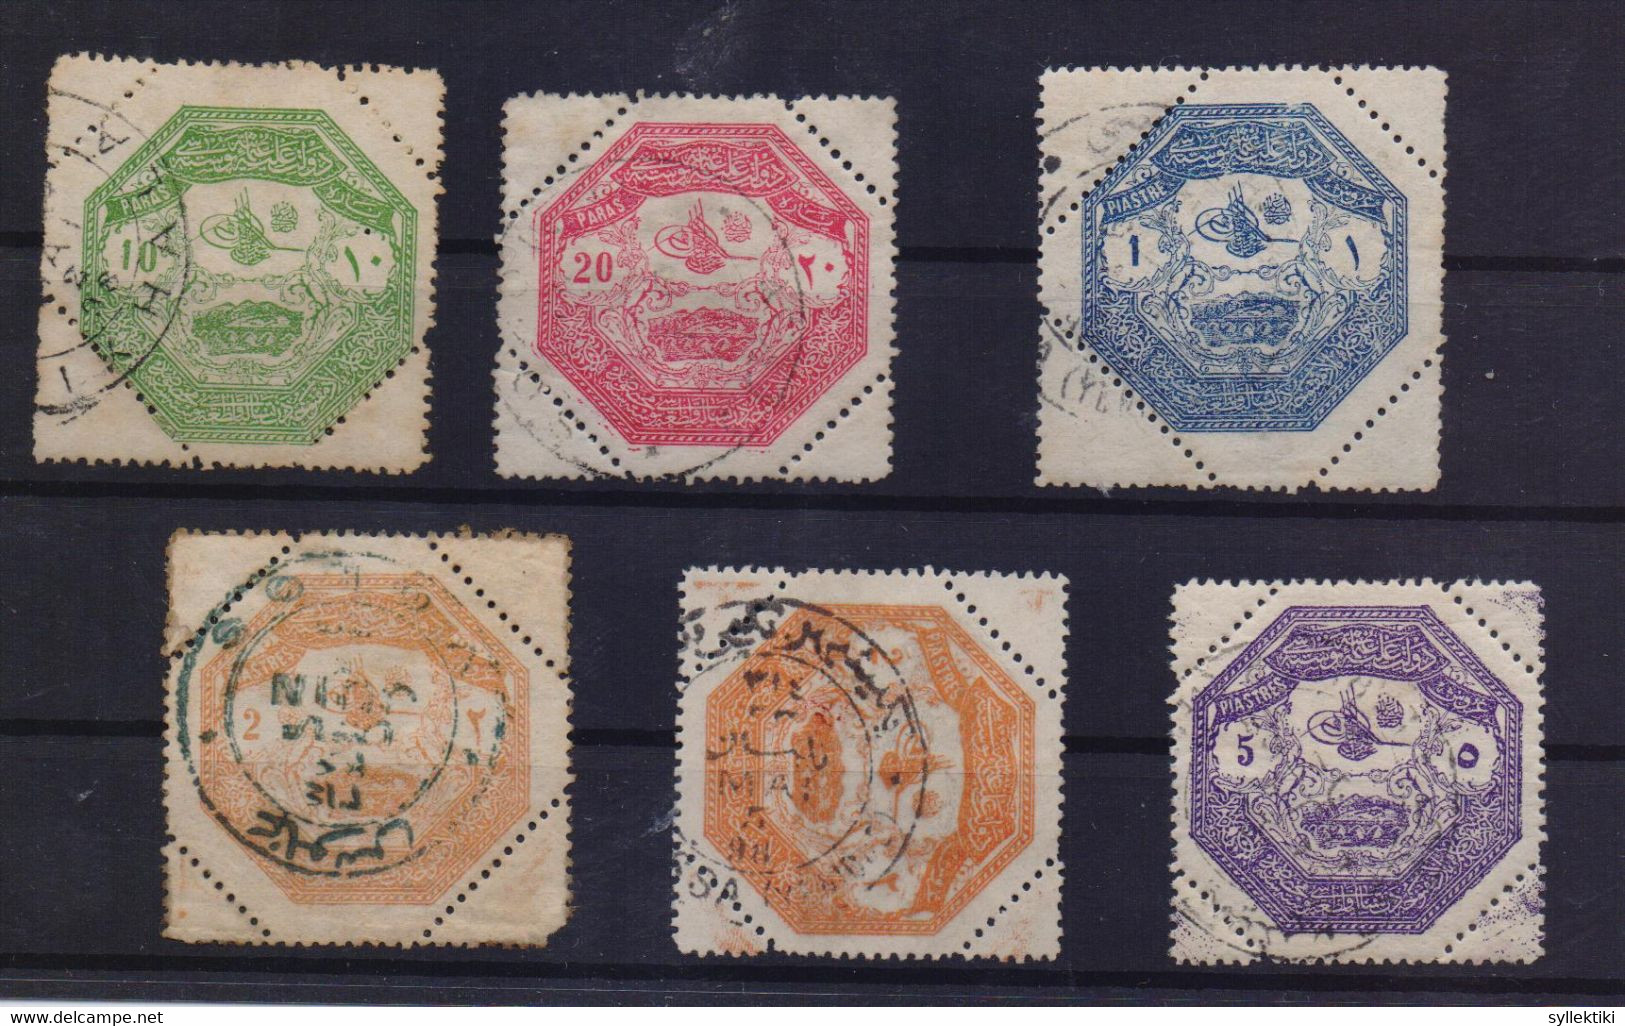 GREECE 1898 THESALLY COMPLETE SET USED STAMPS - Thesalia